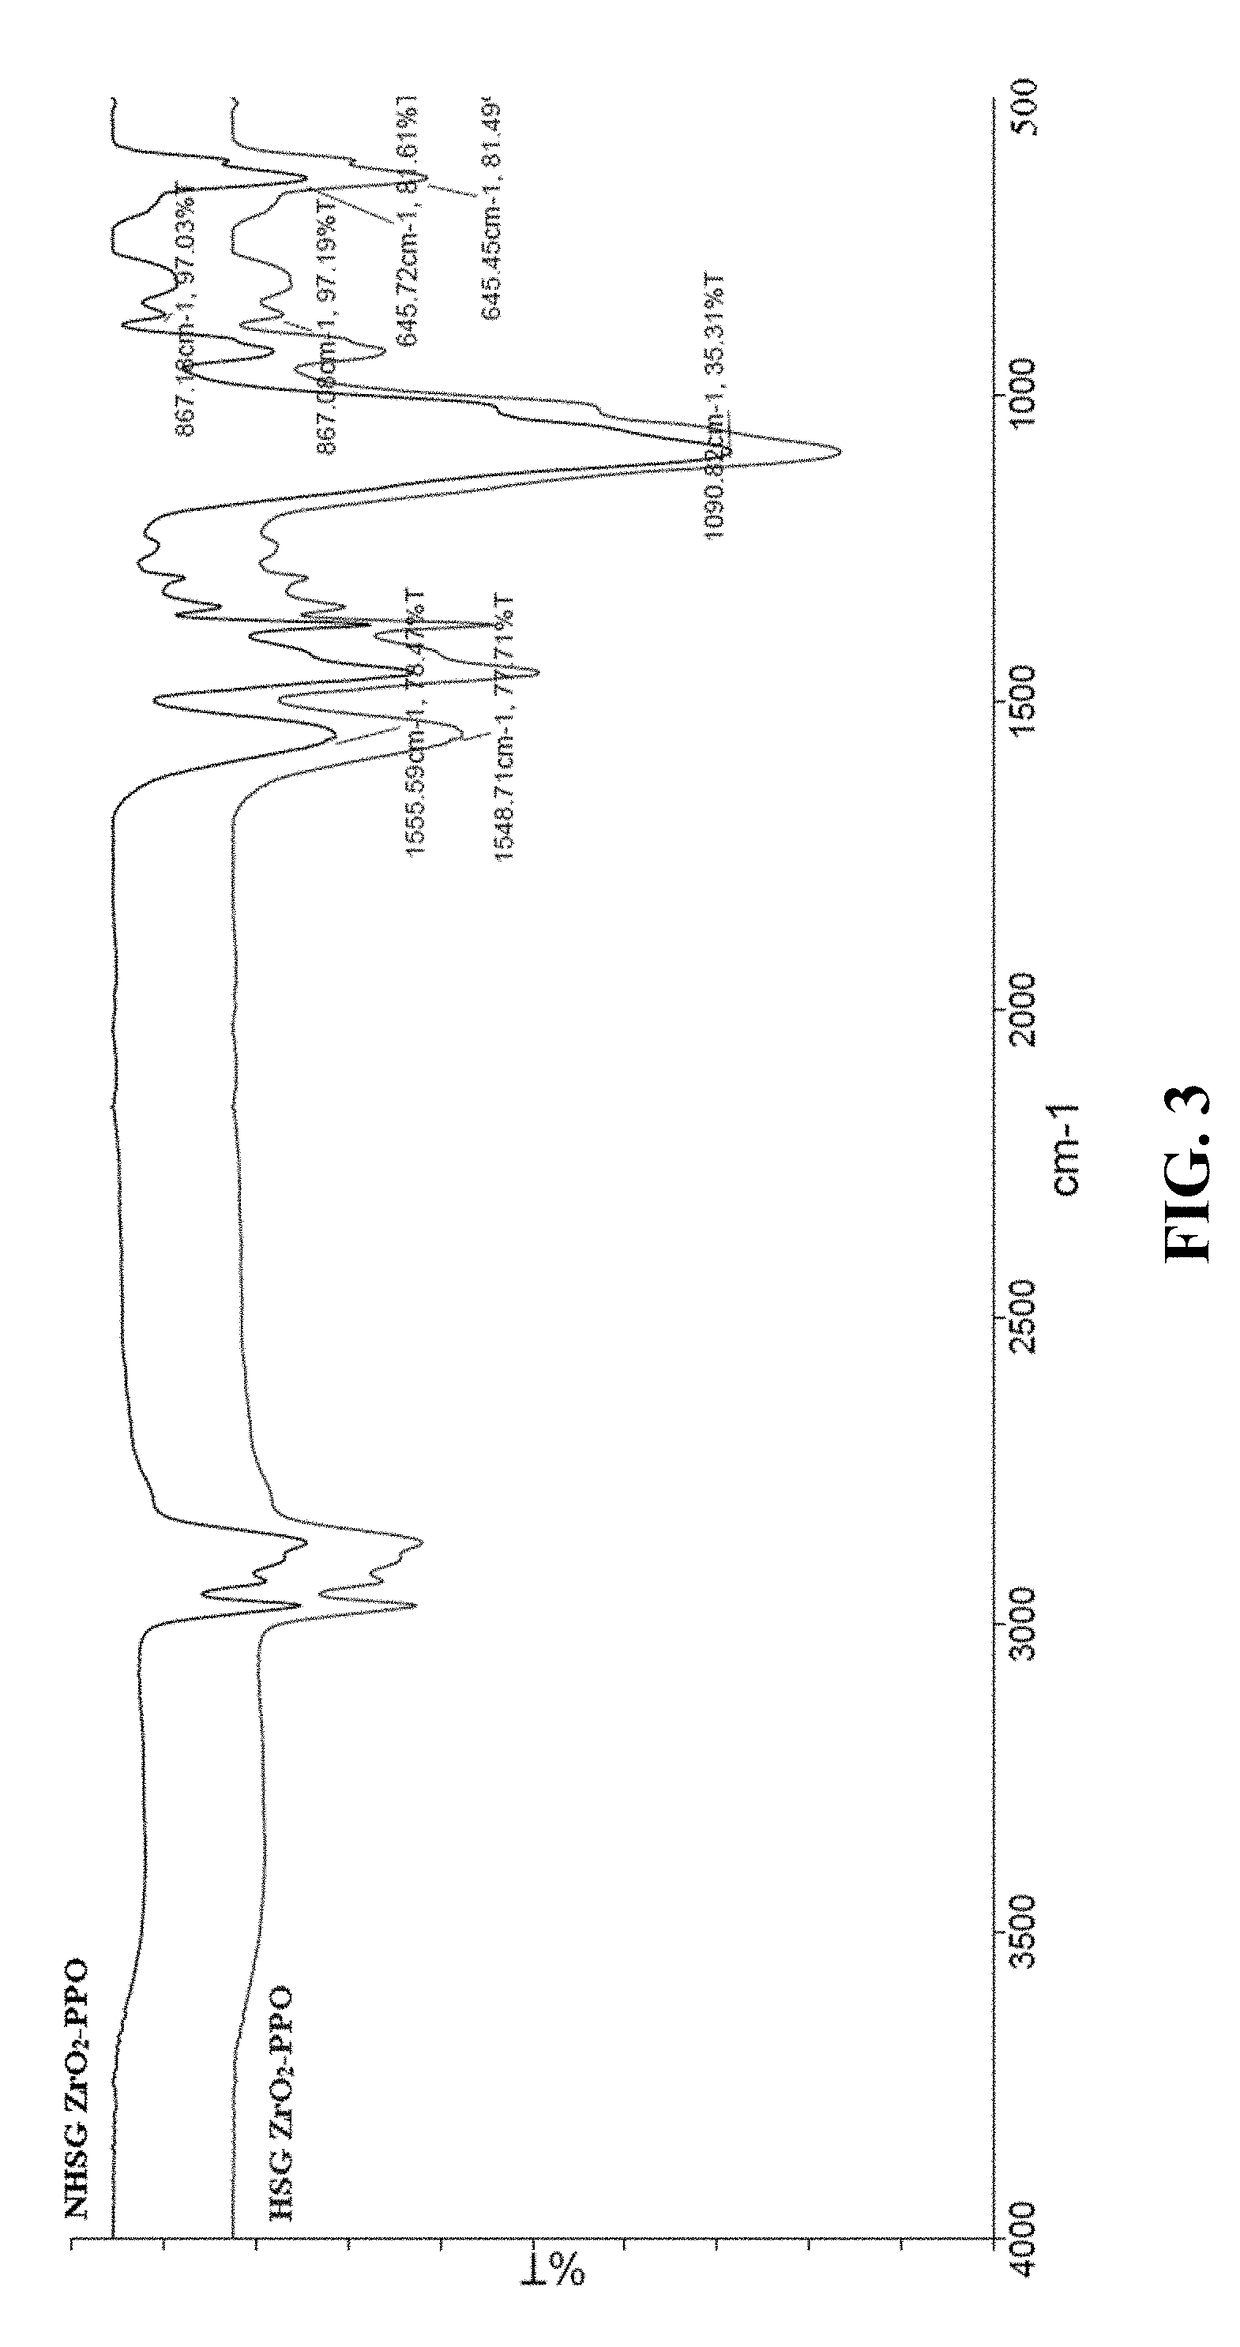 Metal oxide-based biocompatible hybrid sorbent for the extraction and enrichment of catecholamine neurotransmitters and related compounds, and method of synthesis